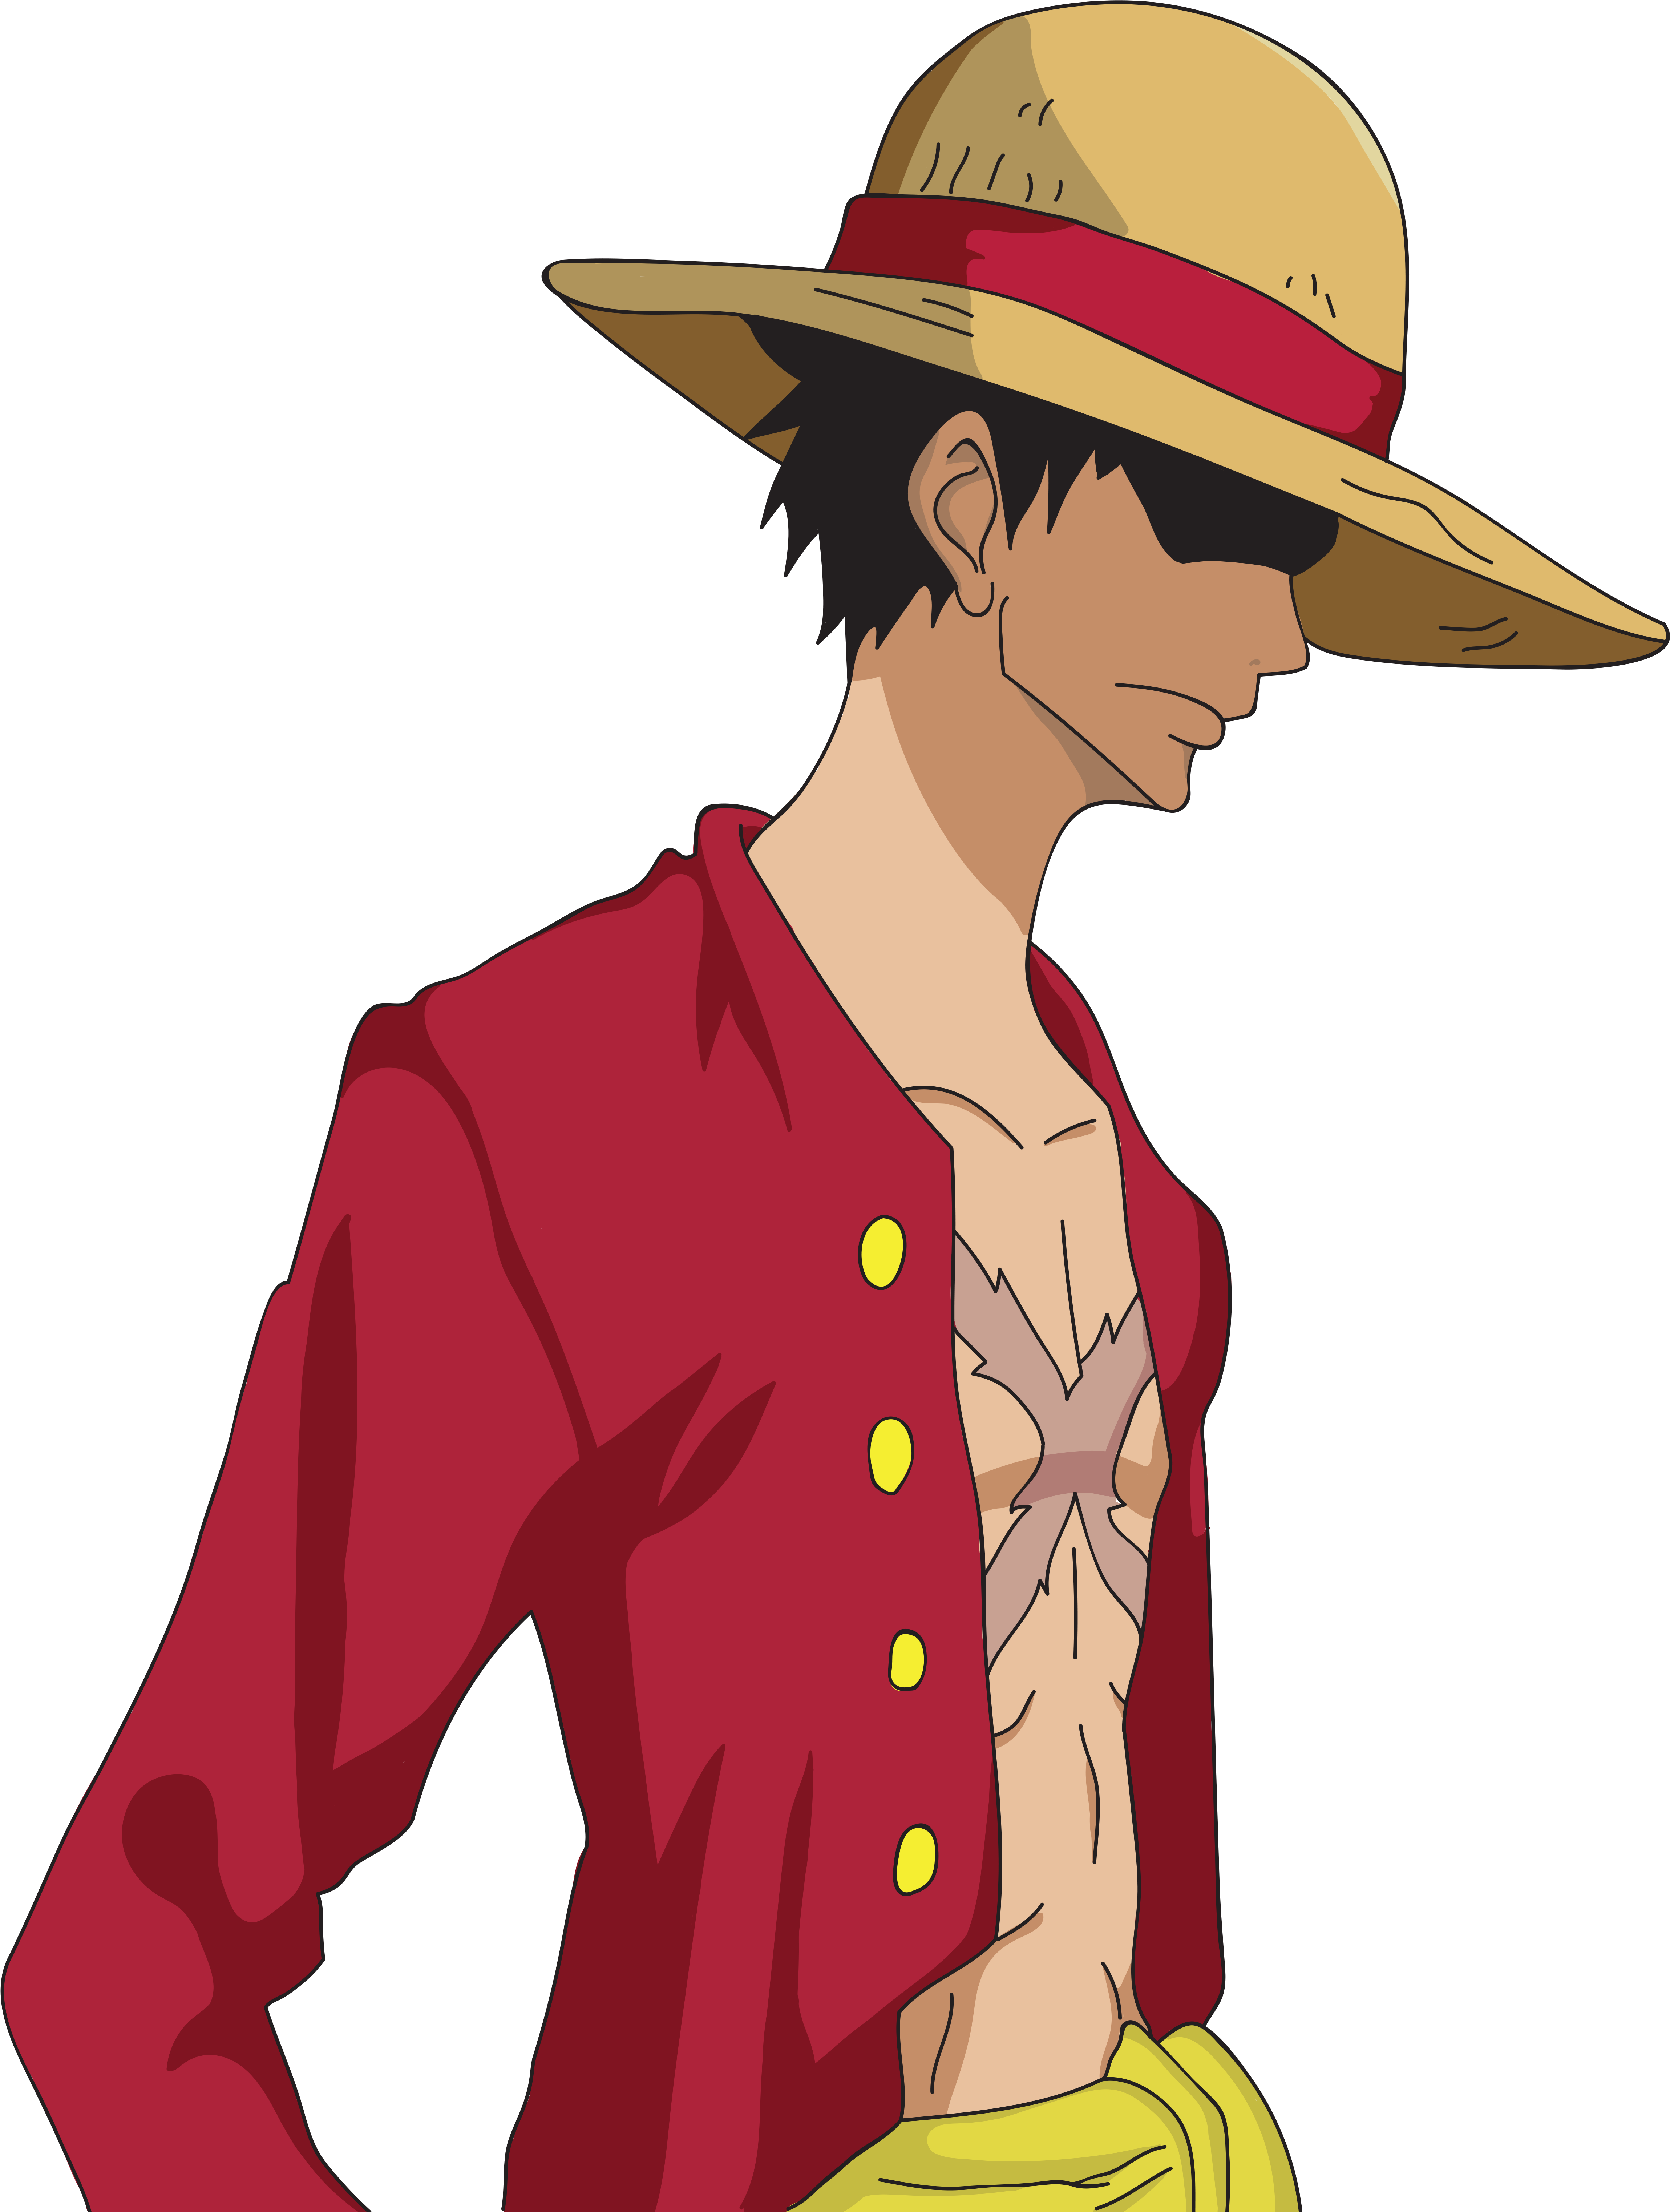 Download and share clipart about Luffy Drawing - Luffy Drawing, Find more h...